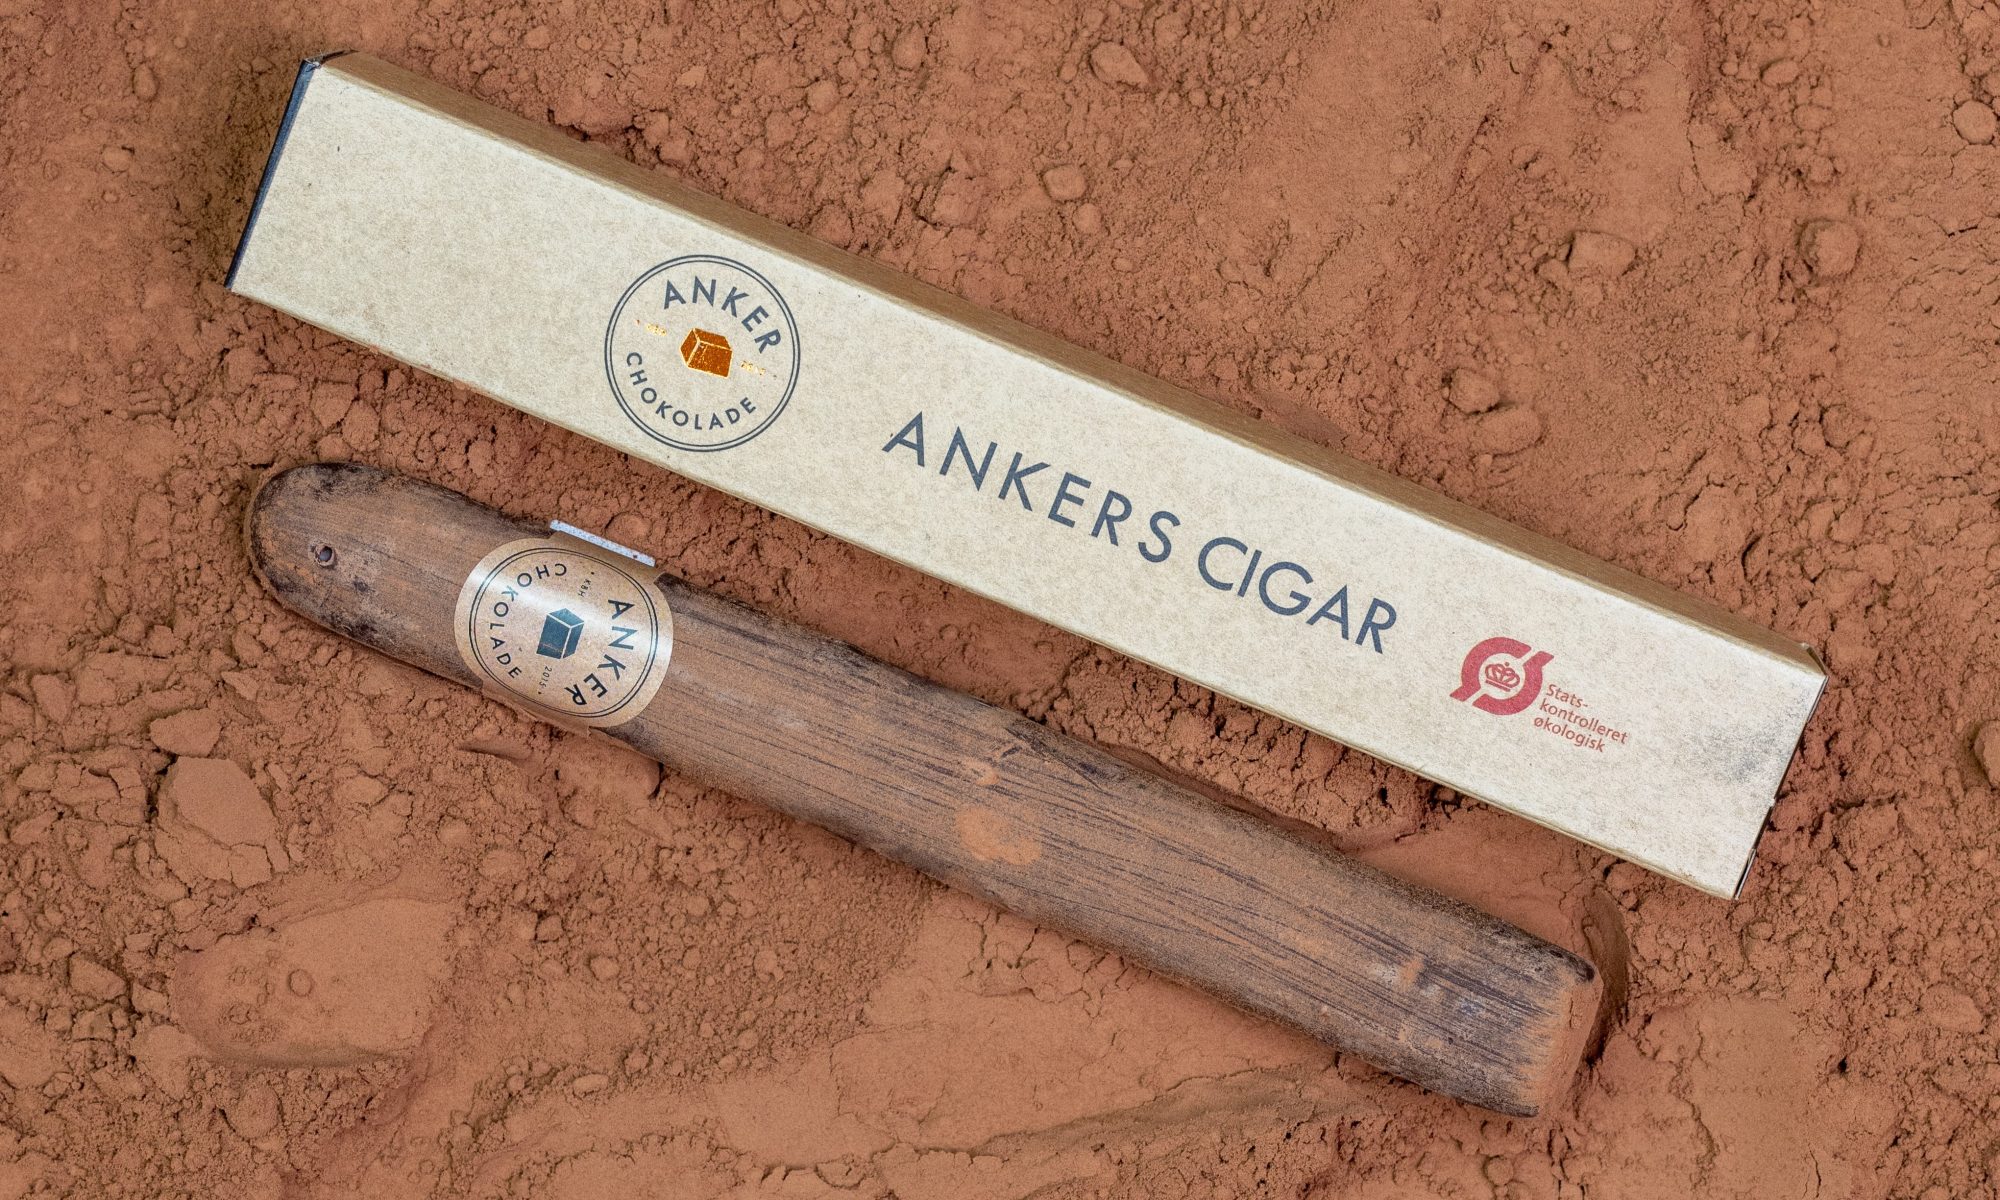 Aners cigar